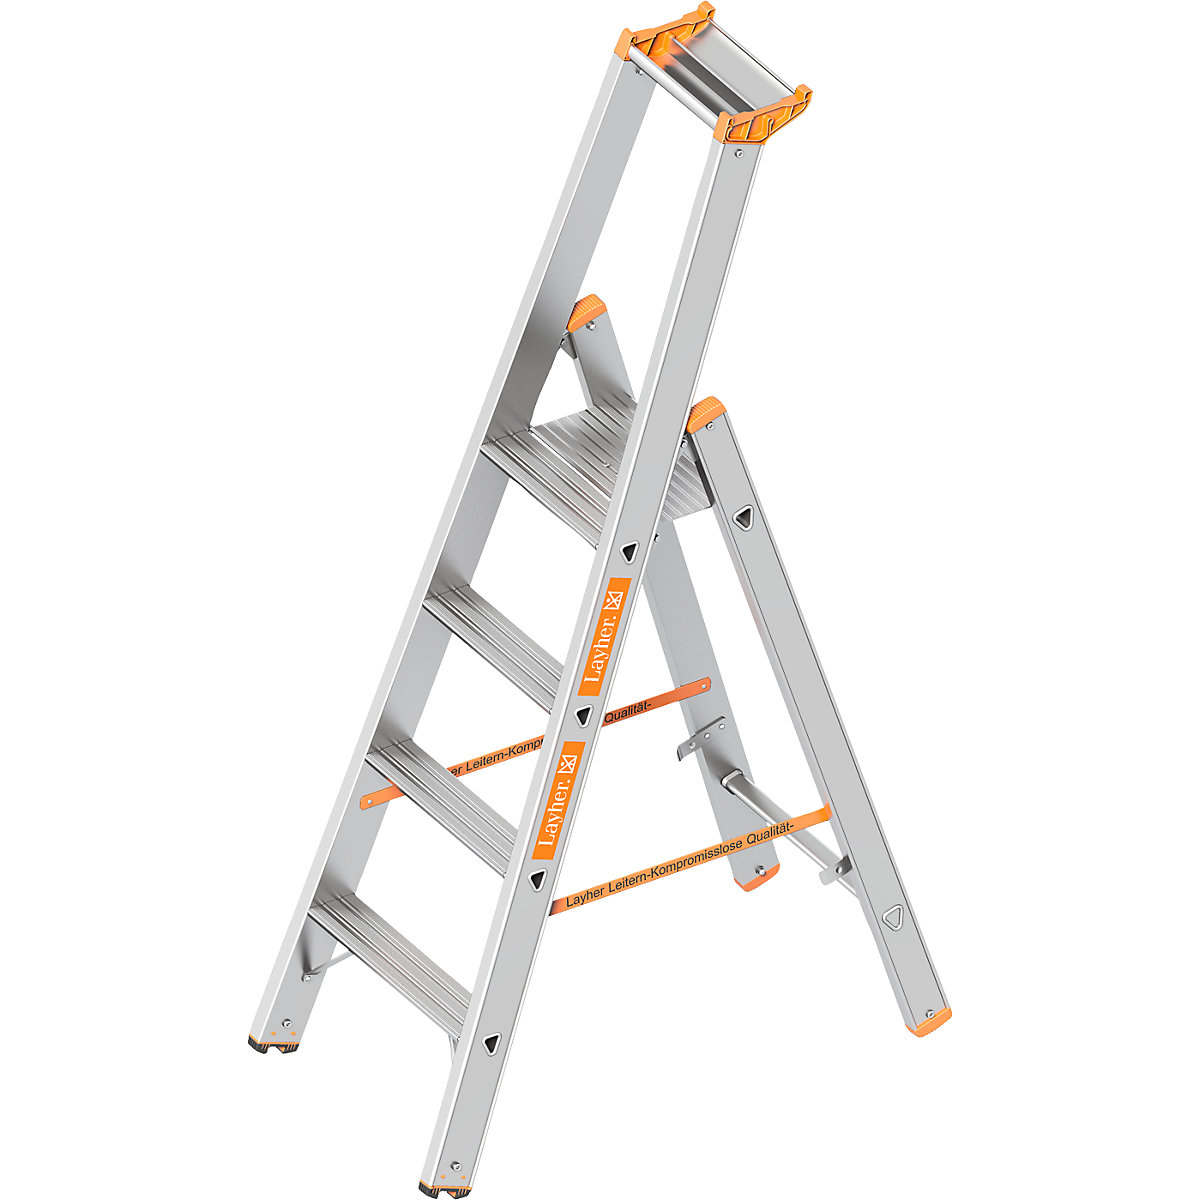 Step ladder – Layher, single sided access, 4 steps incl. platform-6